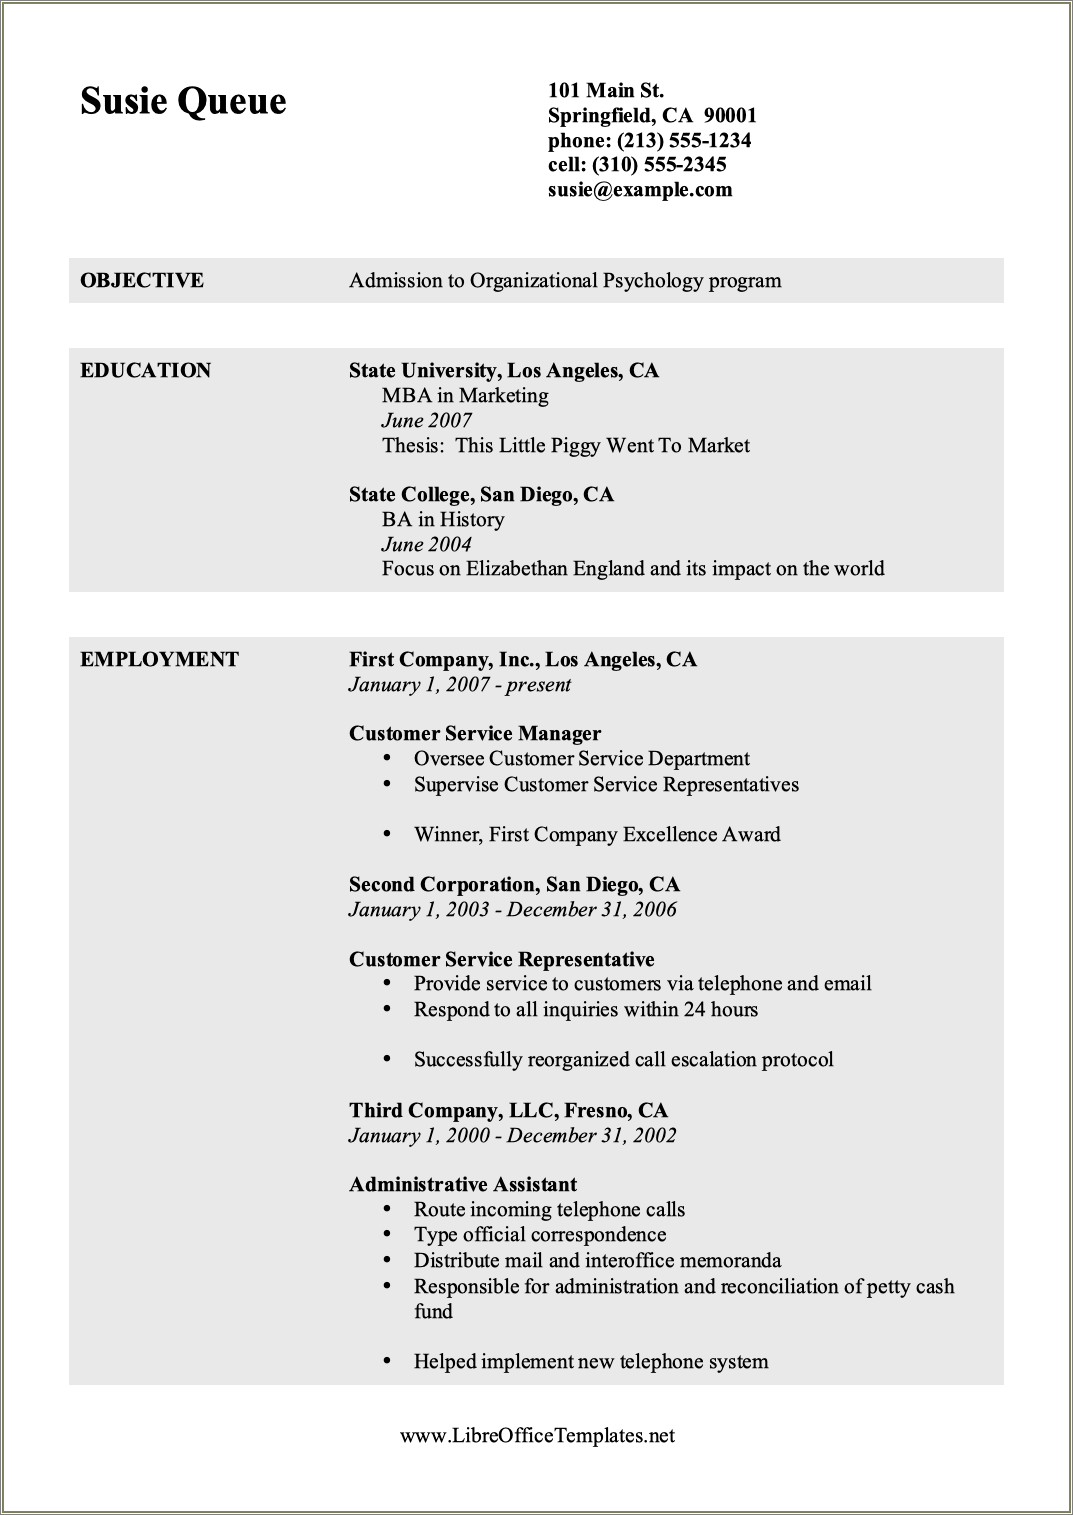 best-open-office-resume-templates-free-resume-example-gallery